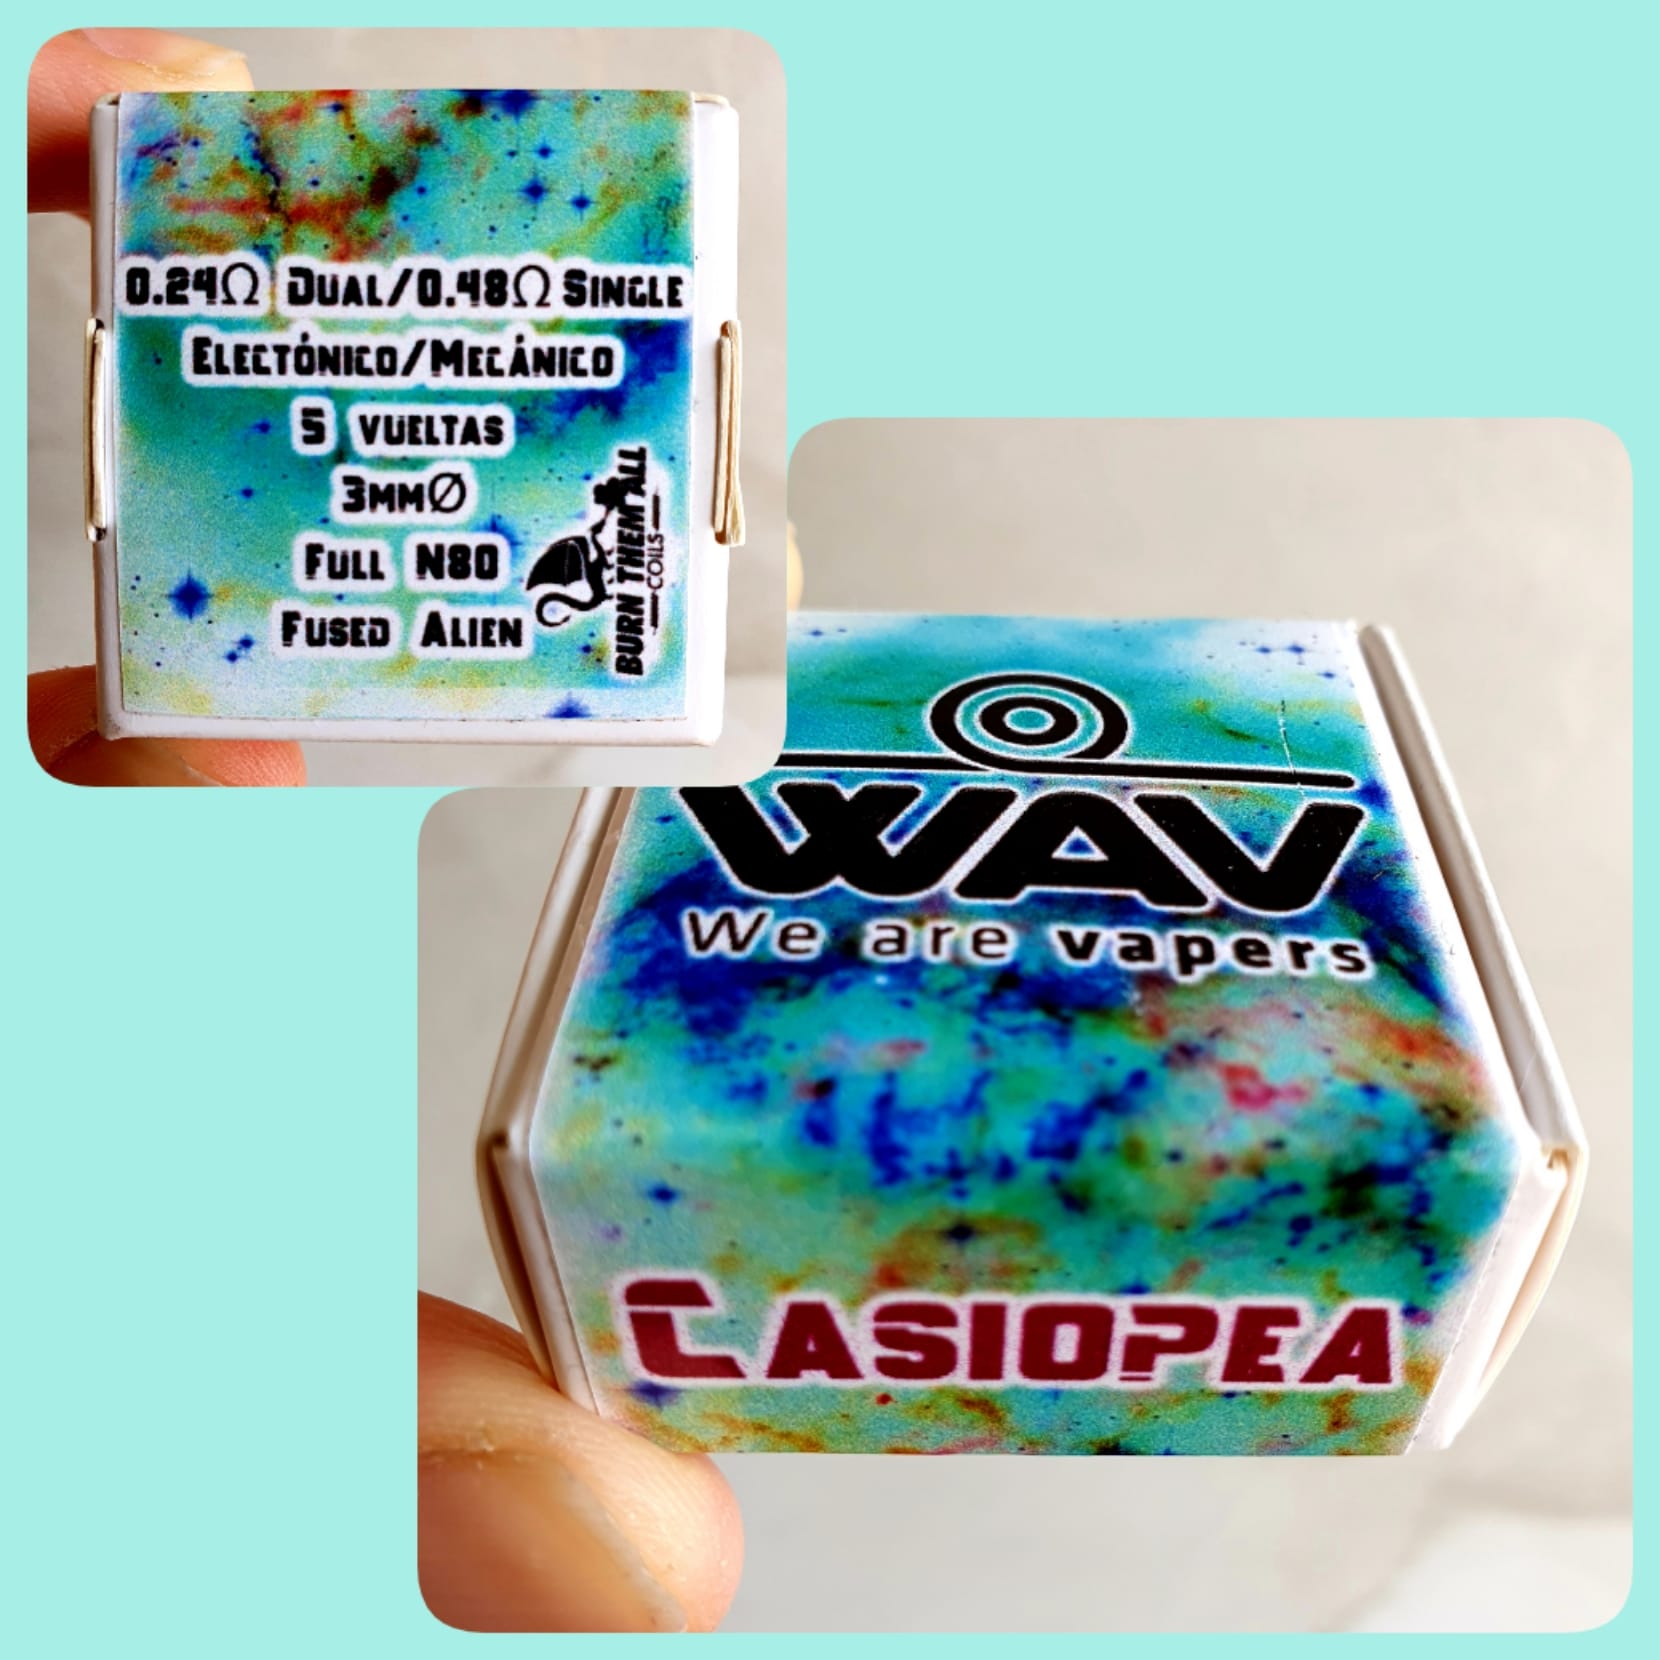 Casiopea coil, We are vapers